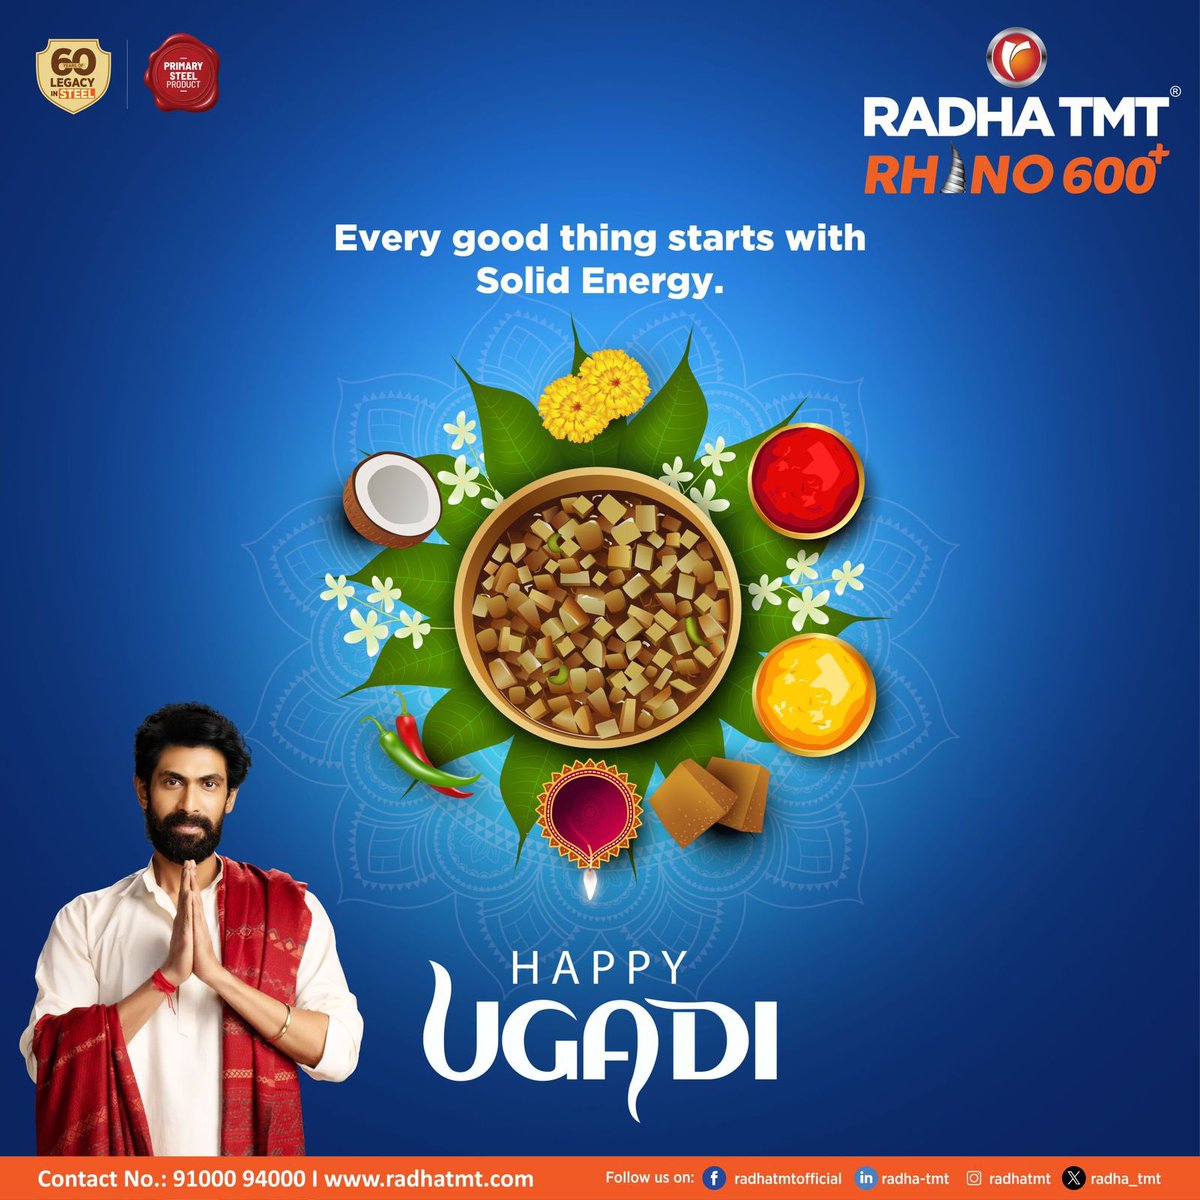 Every good thing starts with solid energy, just like Radha TMT, which turns your dreams into reality. Wishing you a very prosperous Ugadi! 

Check us out at: radhatmt.com
#RadhaTMT #strength #quality #manufacturing #technology #superiorquality #infra #Ugadi